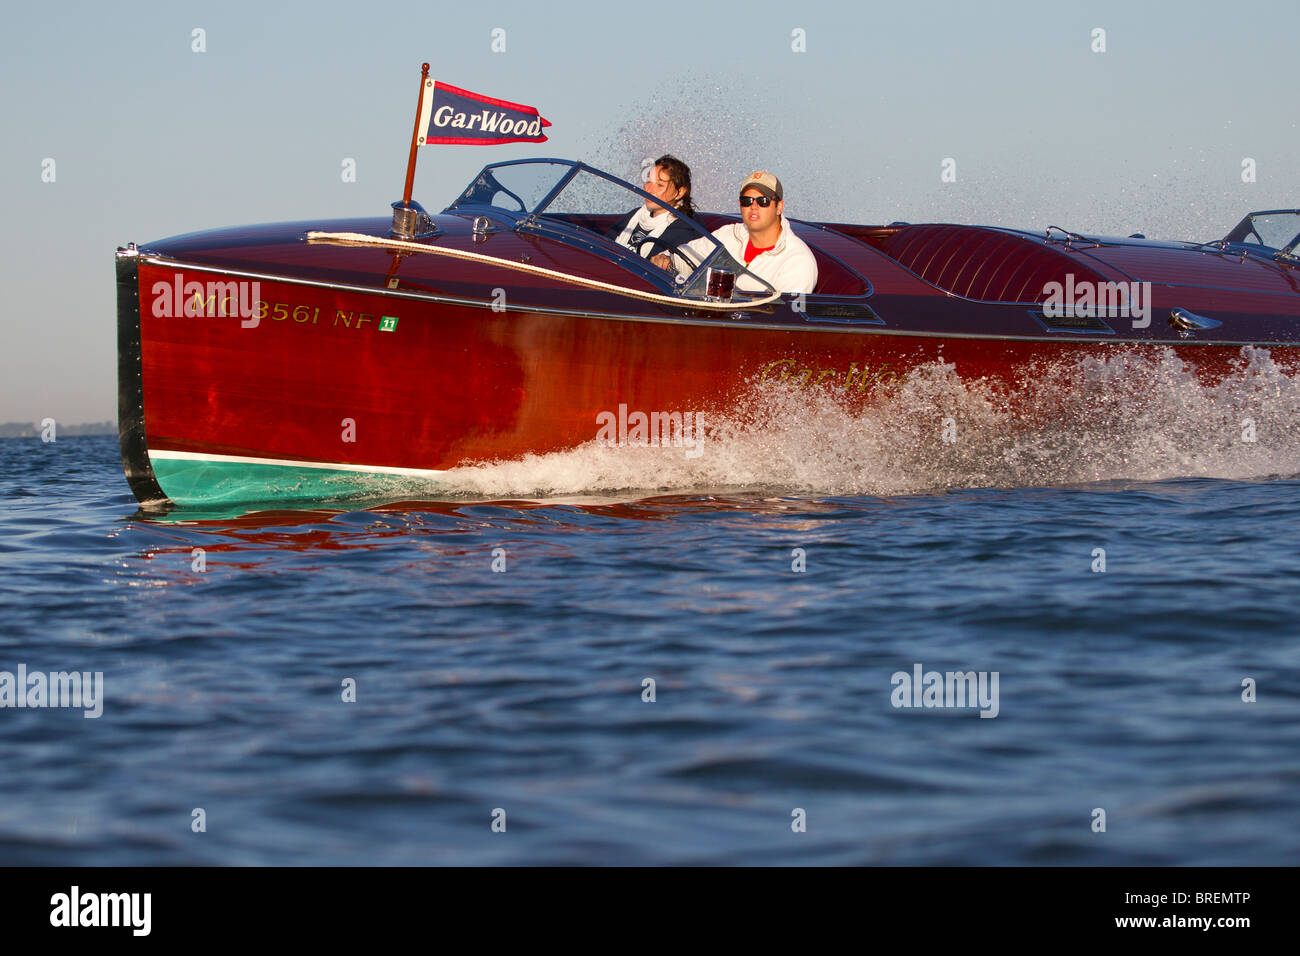 An antique, wooden Gar Wood boat in a high speed turn. Stock Photo